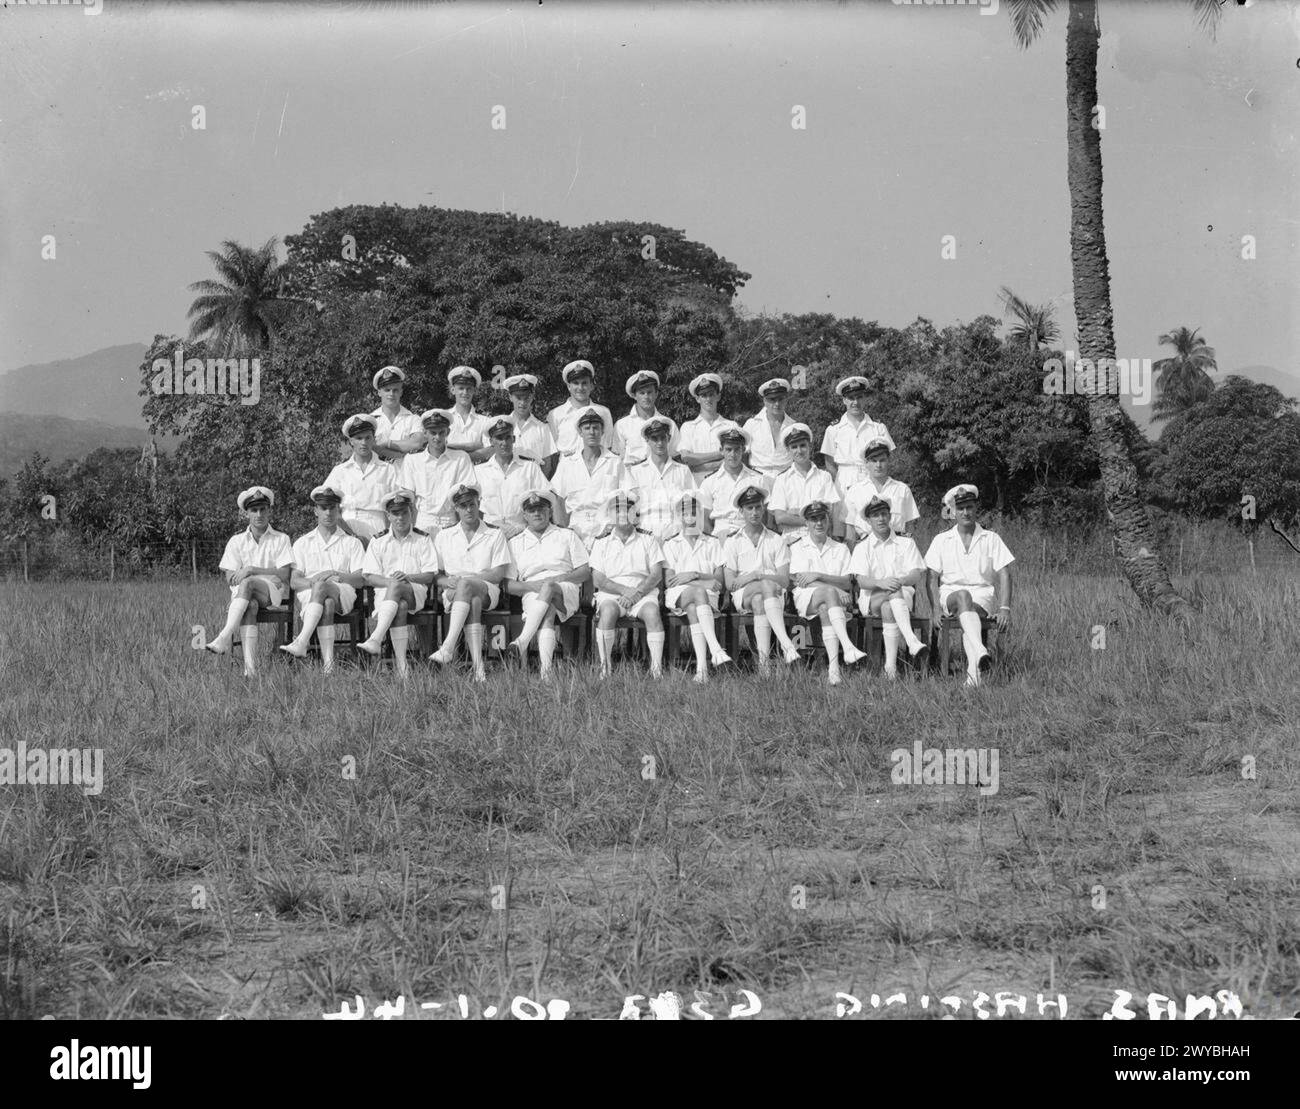 A NAVAL AIR STATION IN WEST AFRICAN BUSH. MARCH 1944, AT HMS SPURWING, ROYAL NAVAL AIR STATION IN SIERRA LEONE, ONCE A STRETCH OF UNTOUCHABLE BUSH. - The officers of HMS SPURWING. Back row, left to right: Sub Lieut (A) D Kirby, RNVR, Sub Lieut (A) J W Munby, RNVR; Pay Sub Lieut F C Lancaster, RNVR; Midshipman (A) R Collins, RNVR; Sub Lieut (A) N O Turnbull, RNZNVR, Sub Lieut (A) N Donkin, RNZNVR; Sub Lieut (A) G E Povey, RNVR. Middle Row, left to right: Sub Lieut (A) B A W Savage, RNVR, Sub Lieut (A) S H Boustred, RNVR; Mr A J Walters, Warrant Electrician, RN; Sub Lieut (A) N R Hamilton, RNVR; Stock Photo